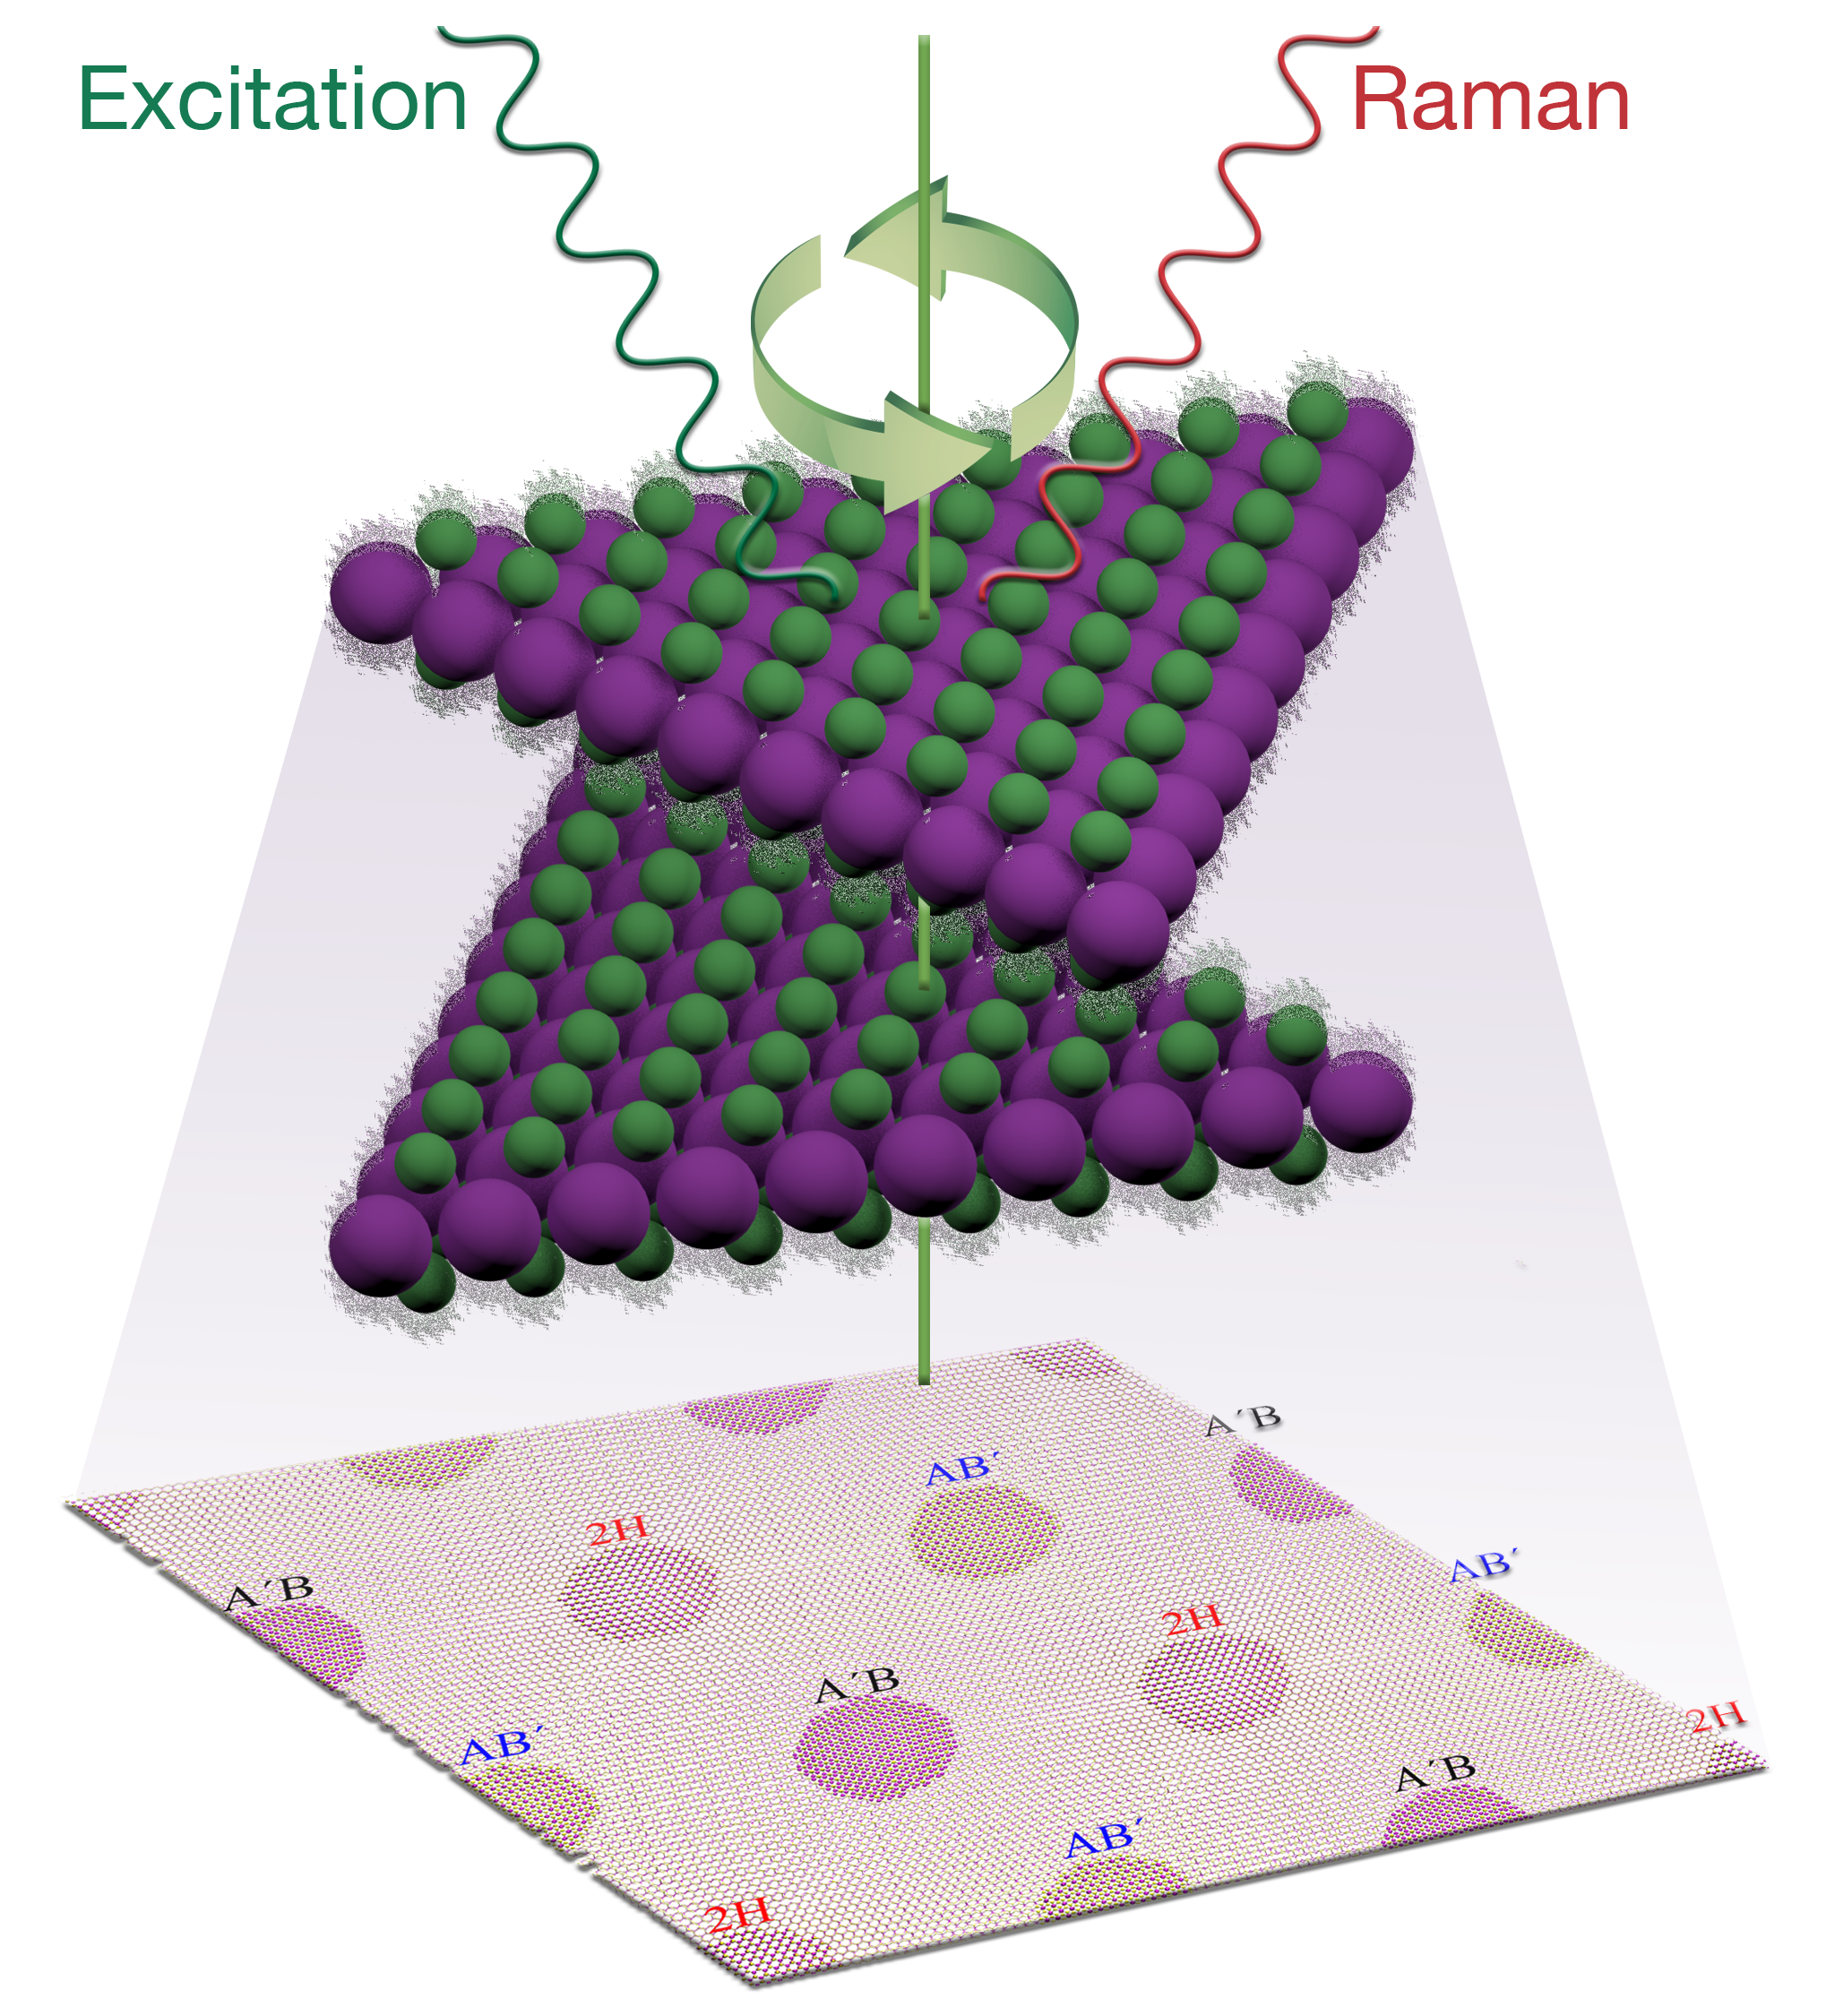 Mutual rotation of two monolayers of a semiconducting material creates a variety of bilayer stacking patterns, depending on the twist angle. Fast and efficient characterization of these stacking patterns may aid exploration of potential applications in electronics and optoelectronics. Image credit: Oak Ridge National Laboratory, U.S. Dept. of Energy